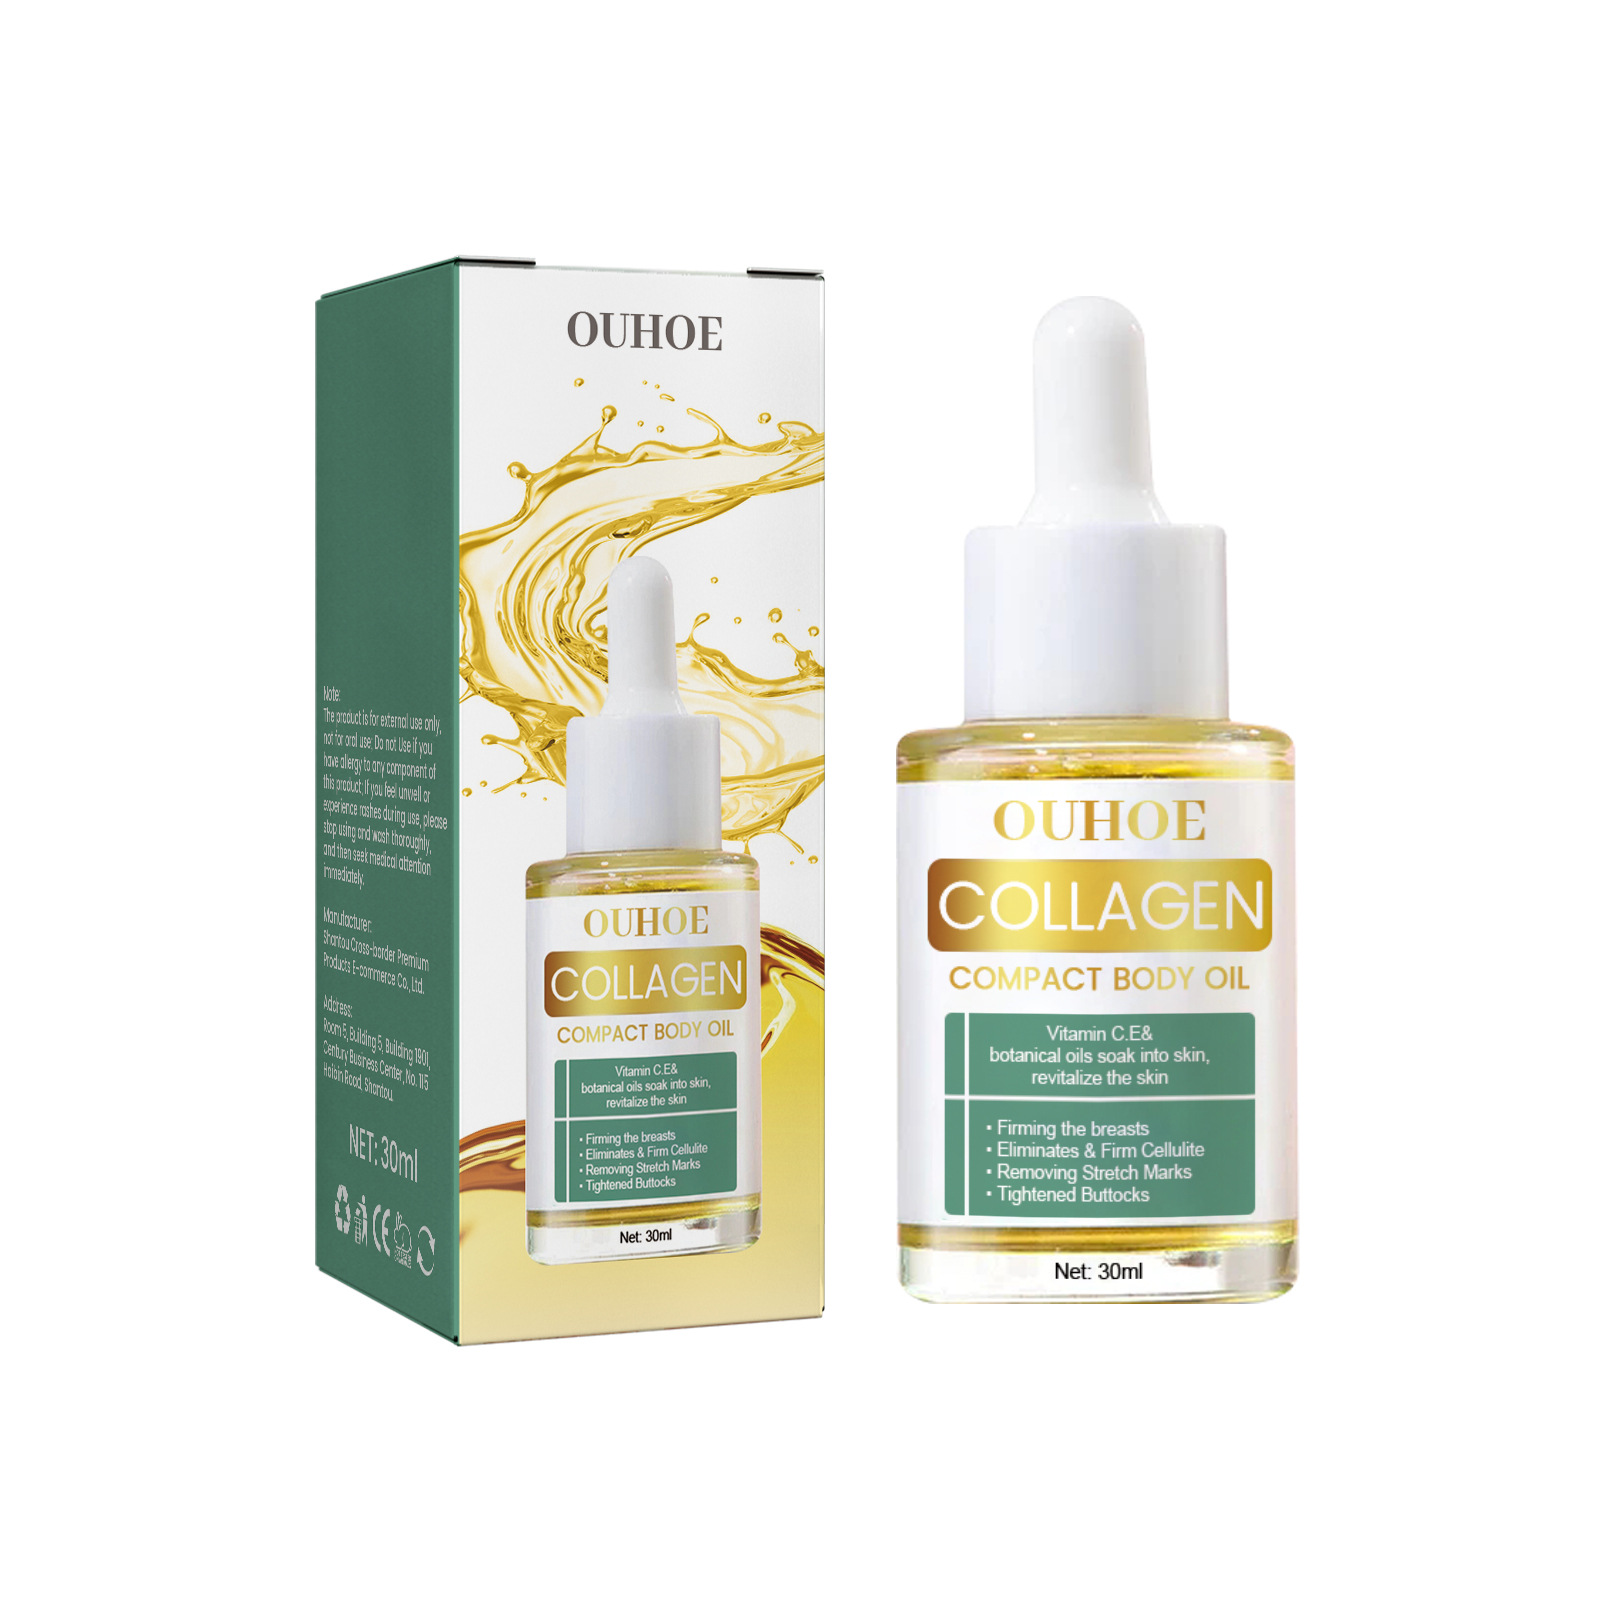 Ouhoe Collagen Lifting Body Oil Body Slimming Body Shaping Massage Oil Firming Belly and Legs Treatment Oil